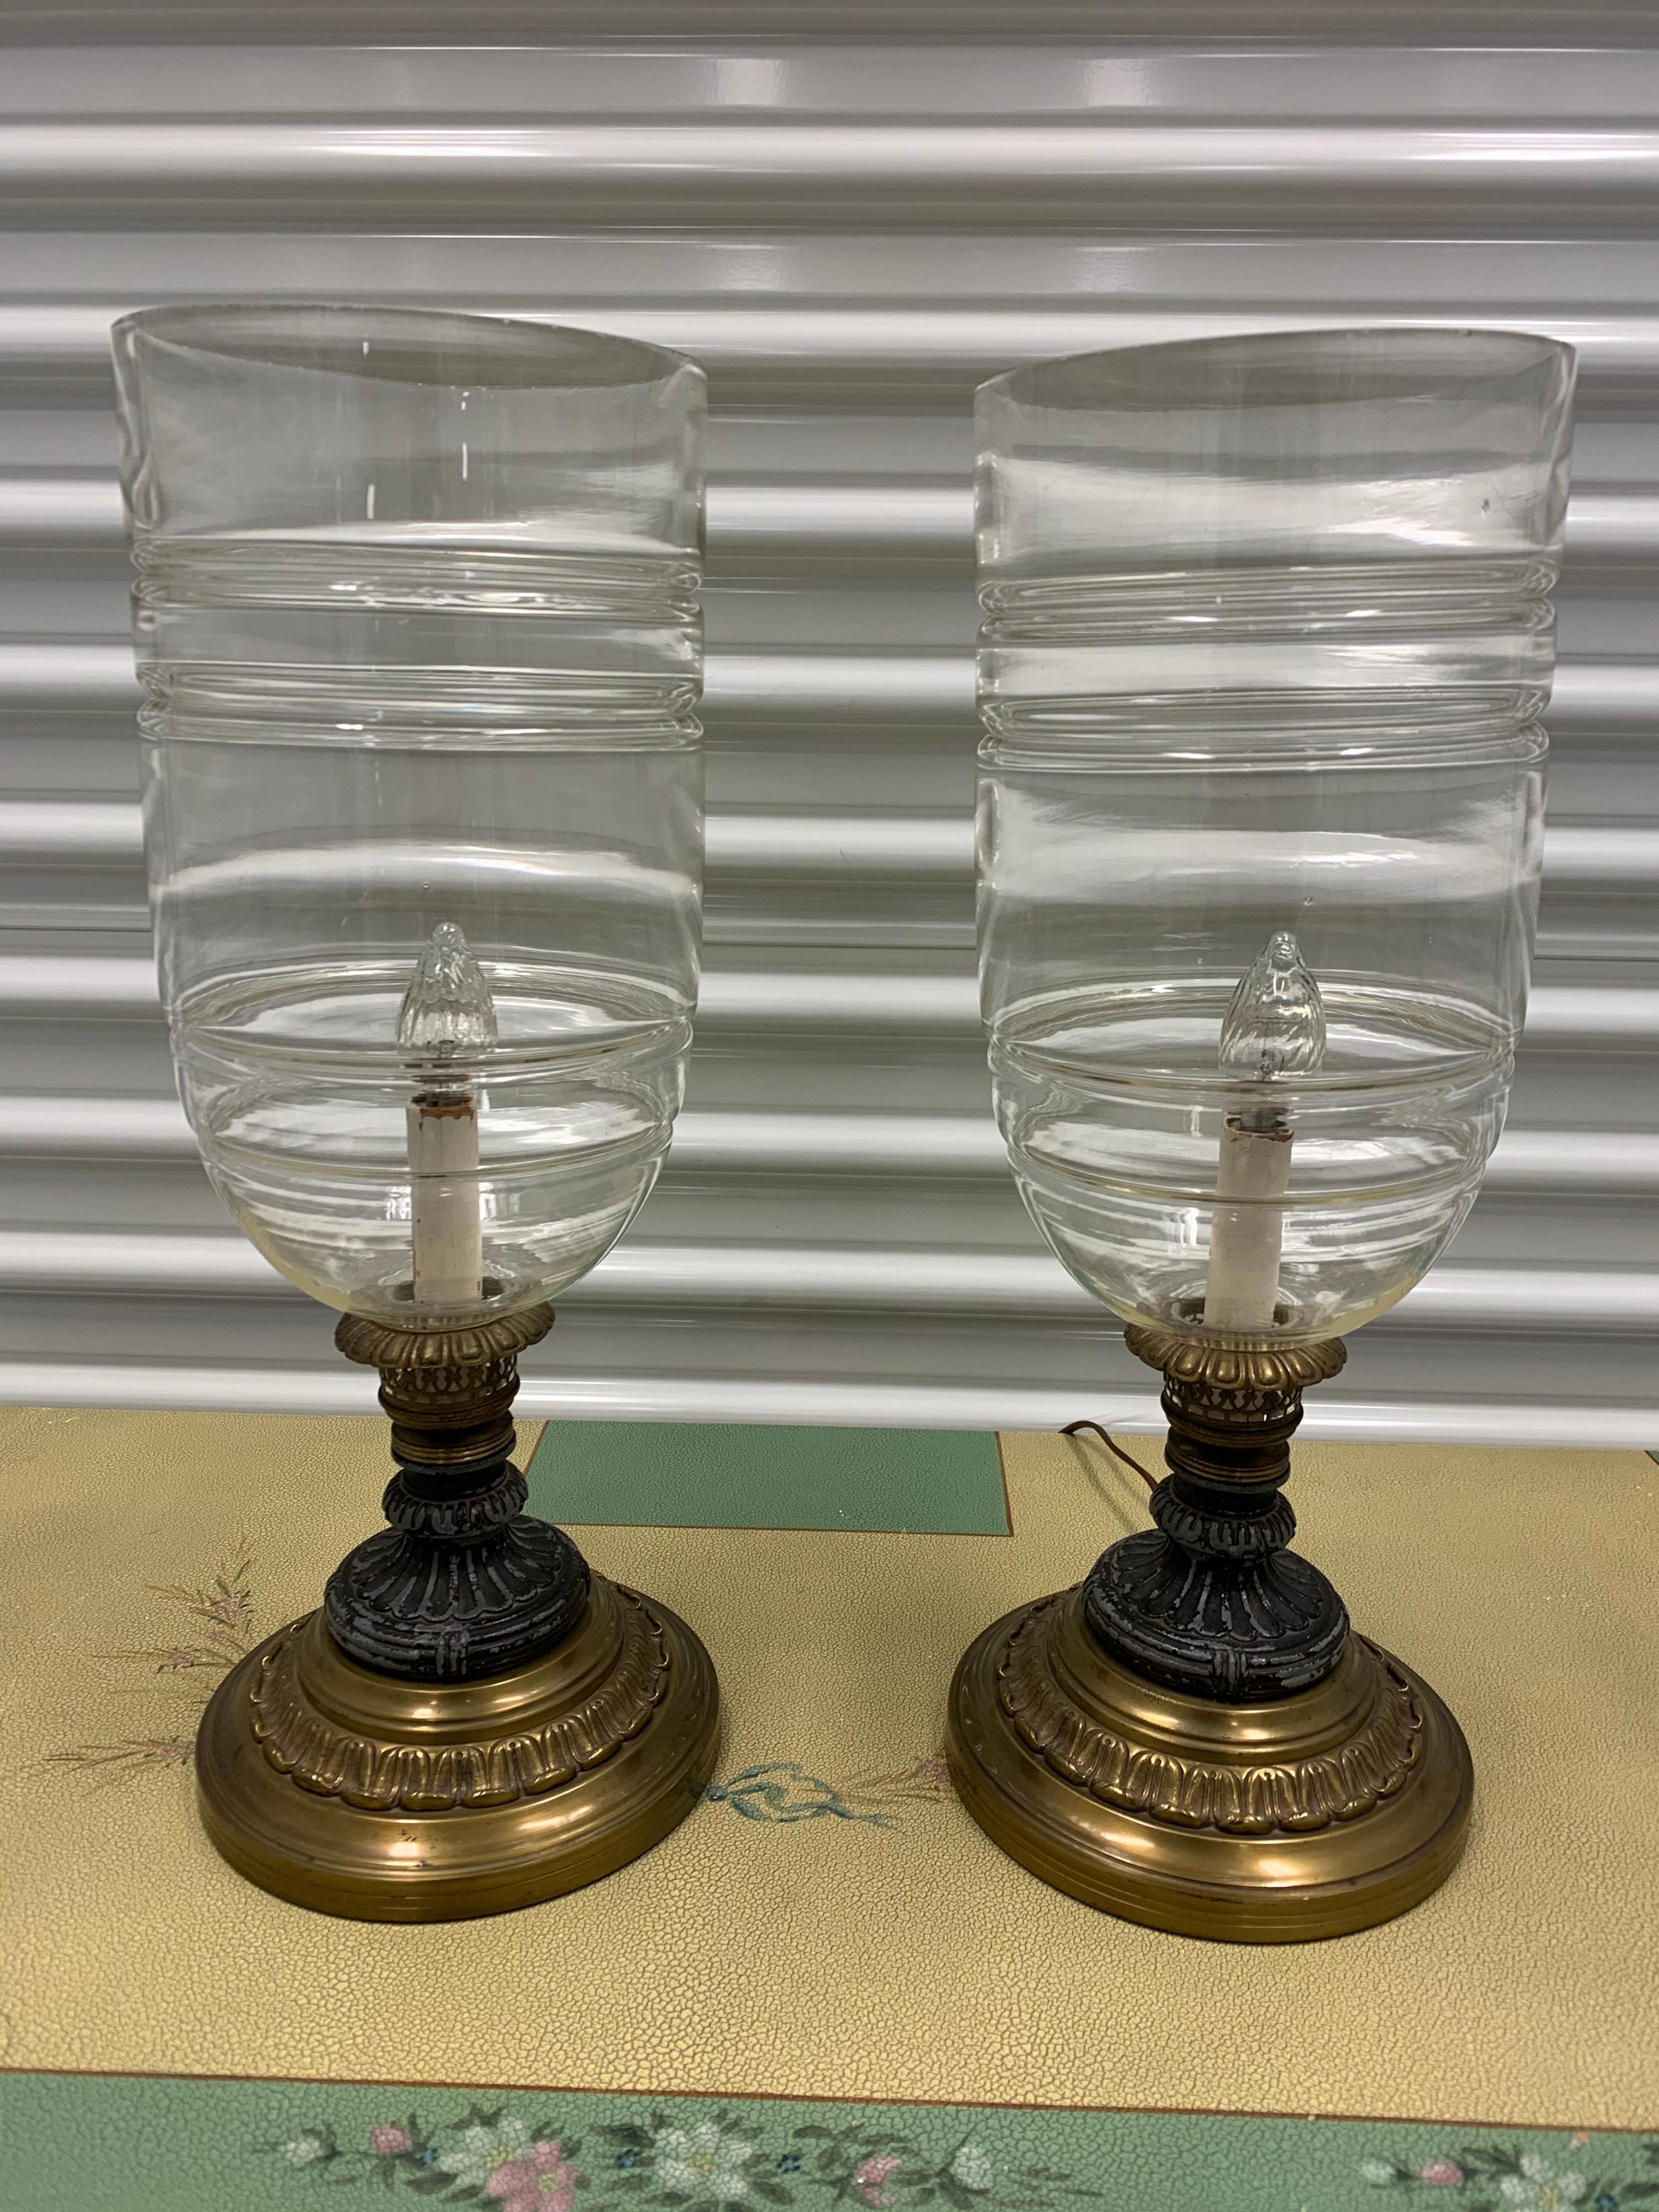 Elegant pair of matching 19 inch tall hurricane lamps that are seven inches in diameter. Brass base under a painted metal black base and then large crystal hurricane pieces. Fully electrified for USA and in working order.